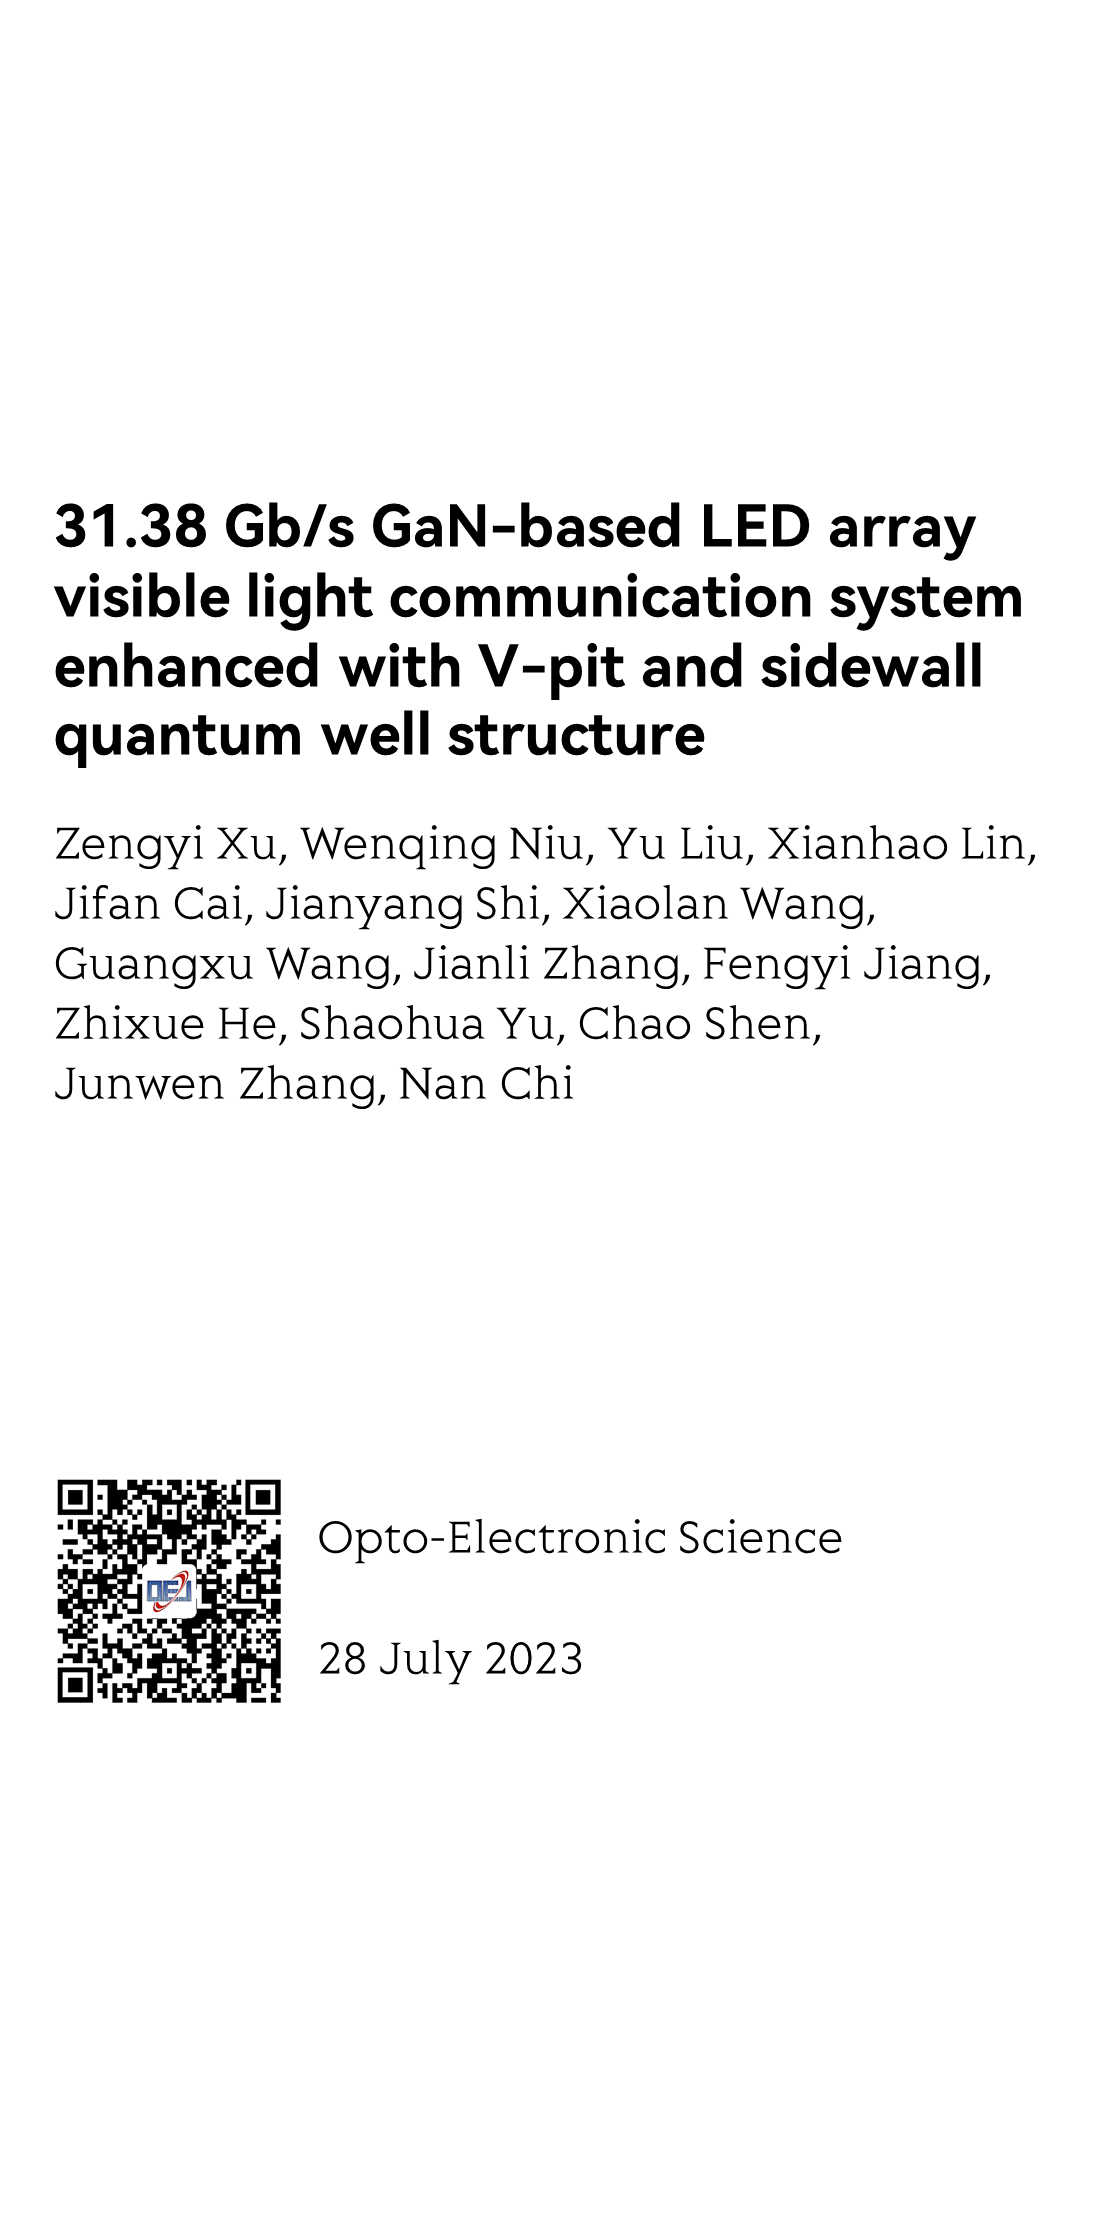 31.38 Gb/s GaN-based LED array visible light communication system enhanced with V-pit and sidewall quantum well structure_1